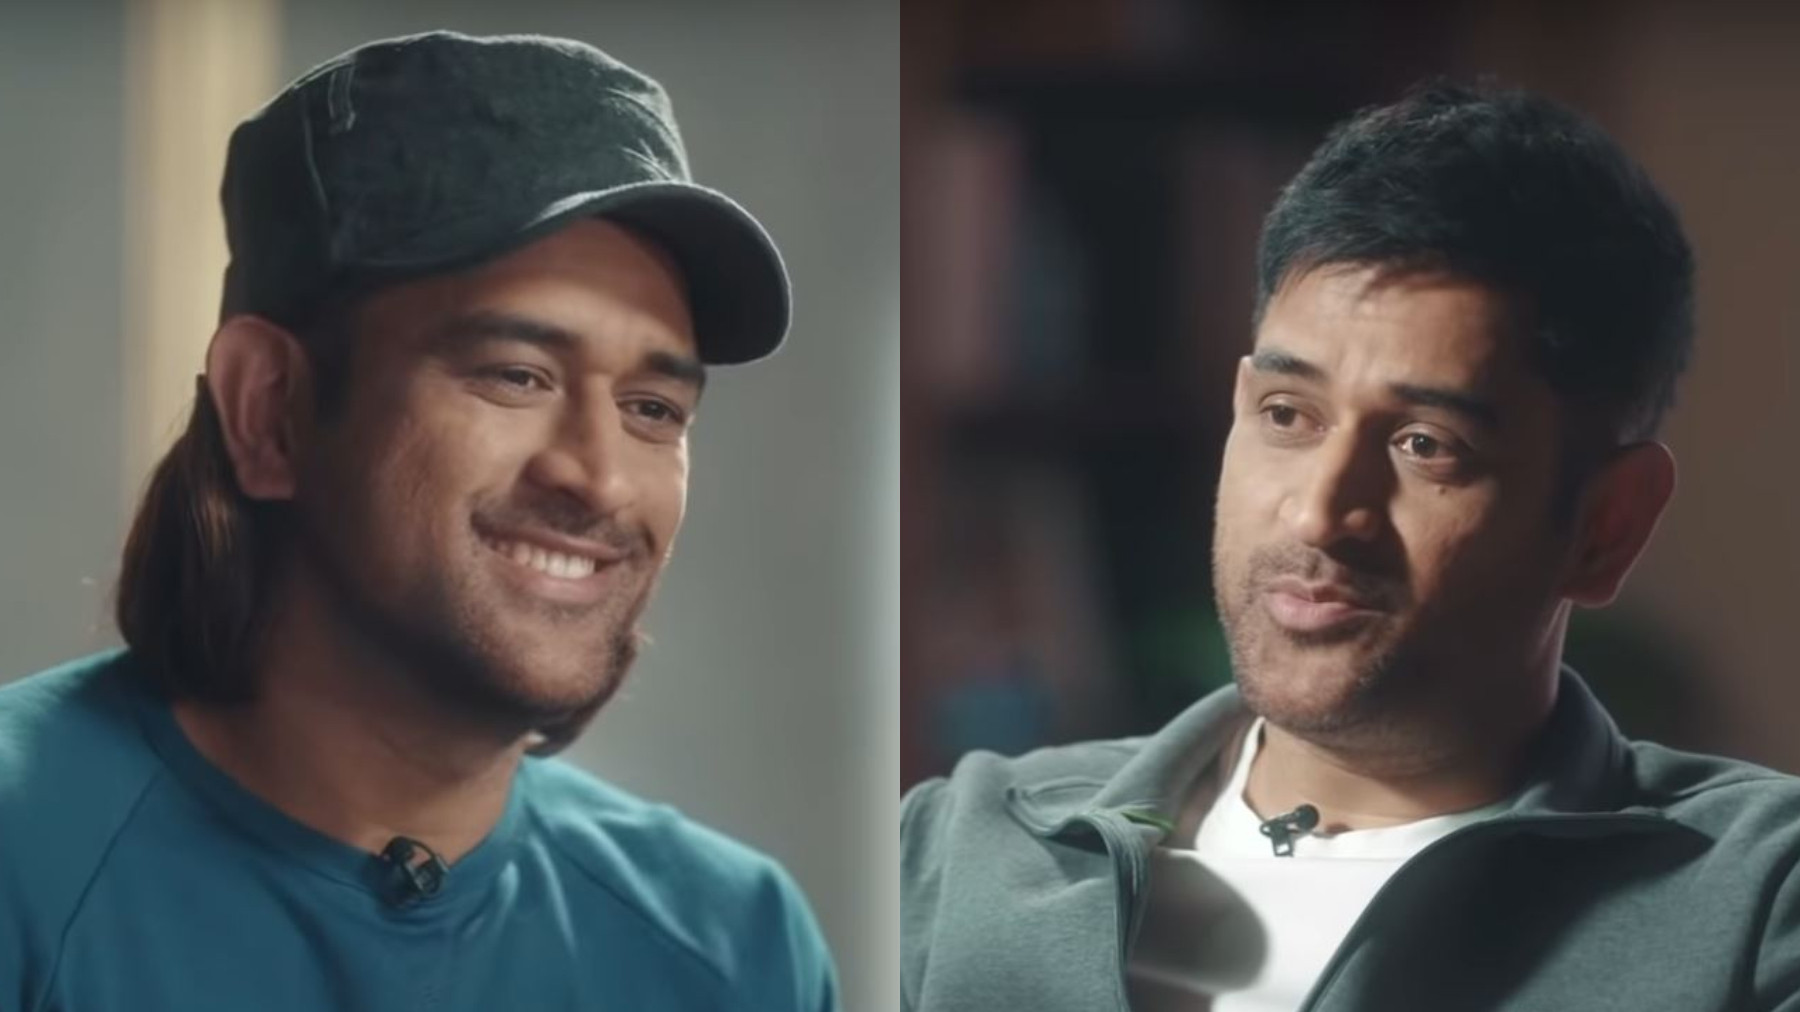 WATCH- MS Dhoni of 2005 has a chat with MS Dhoni of 2021